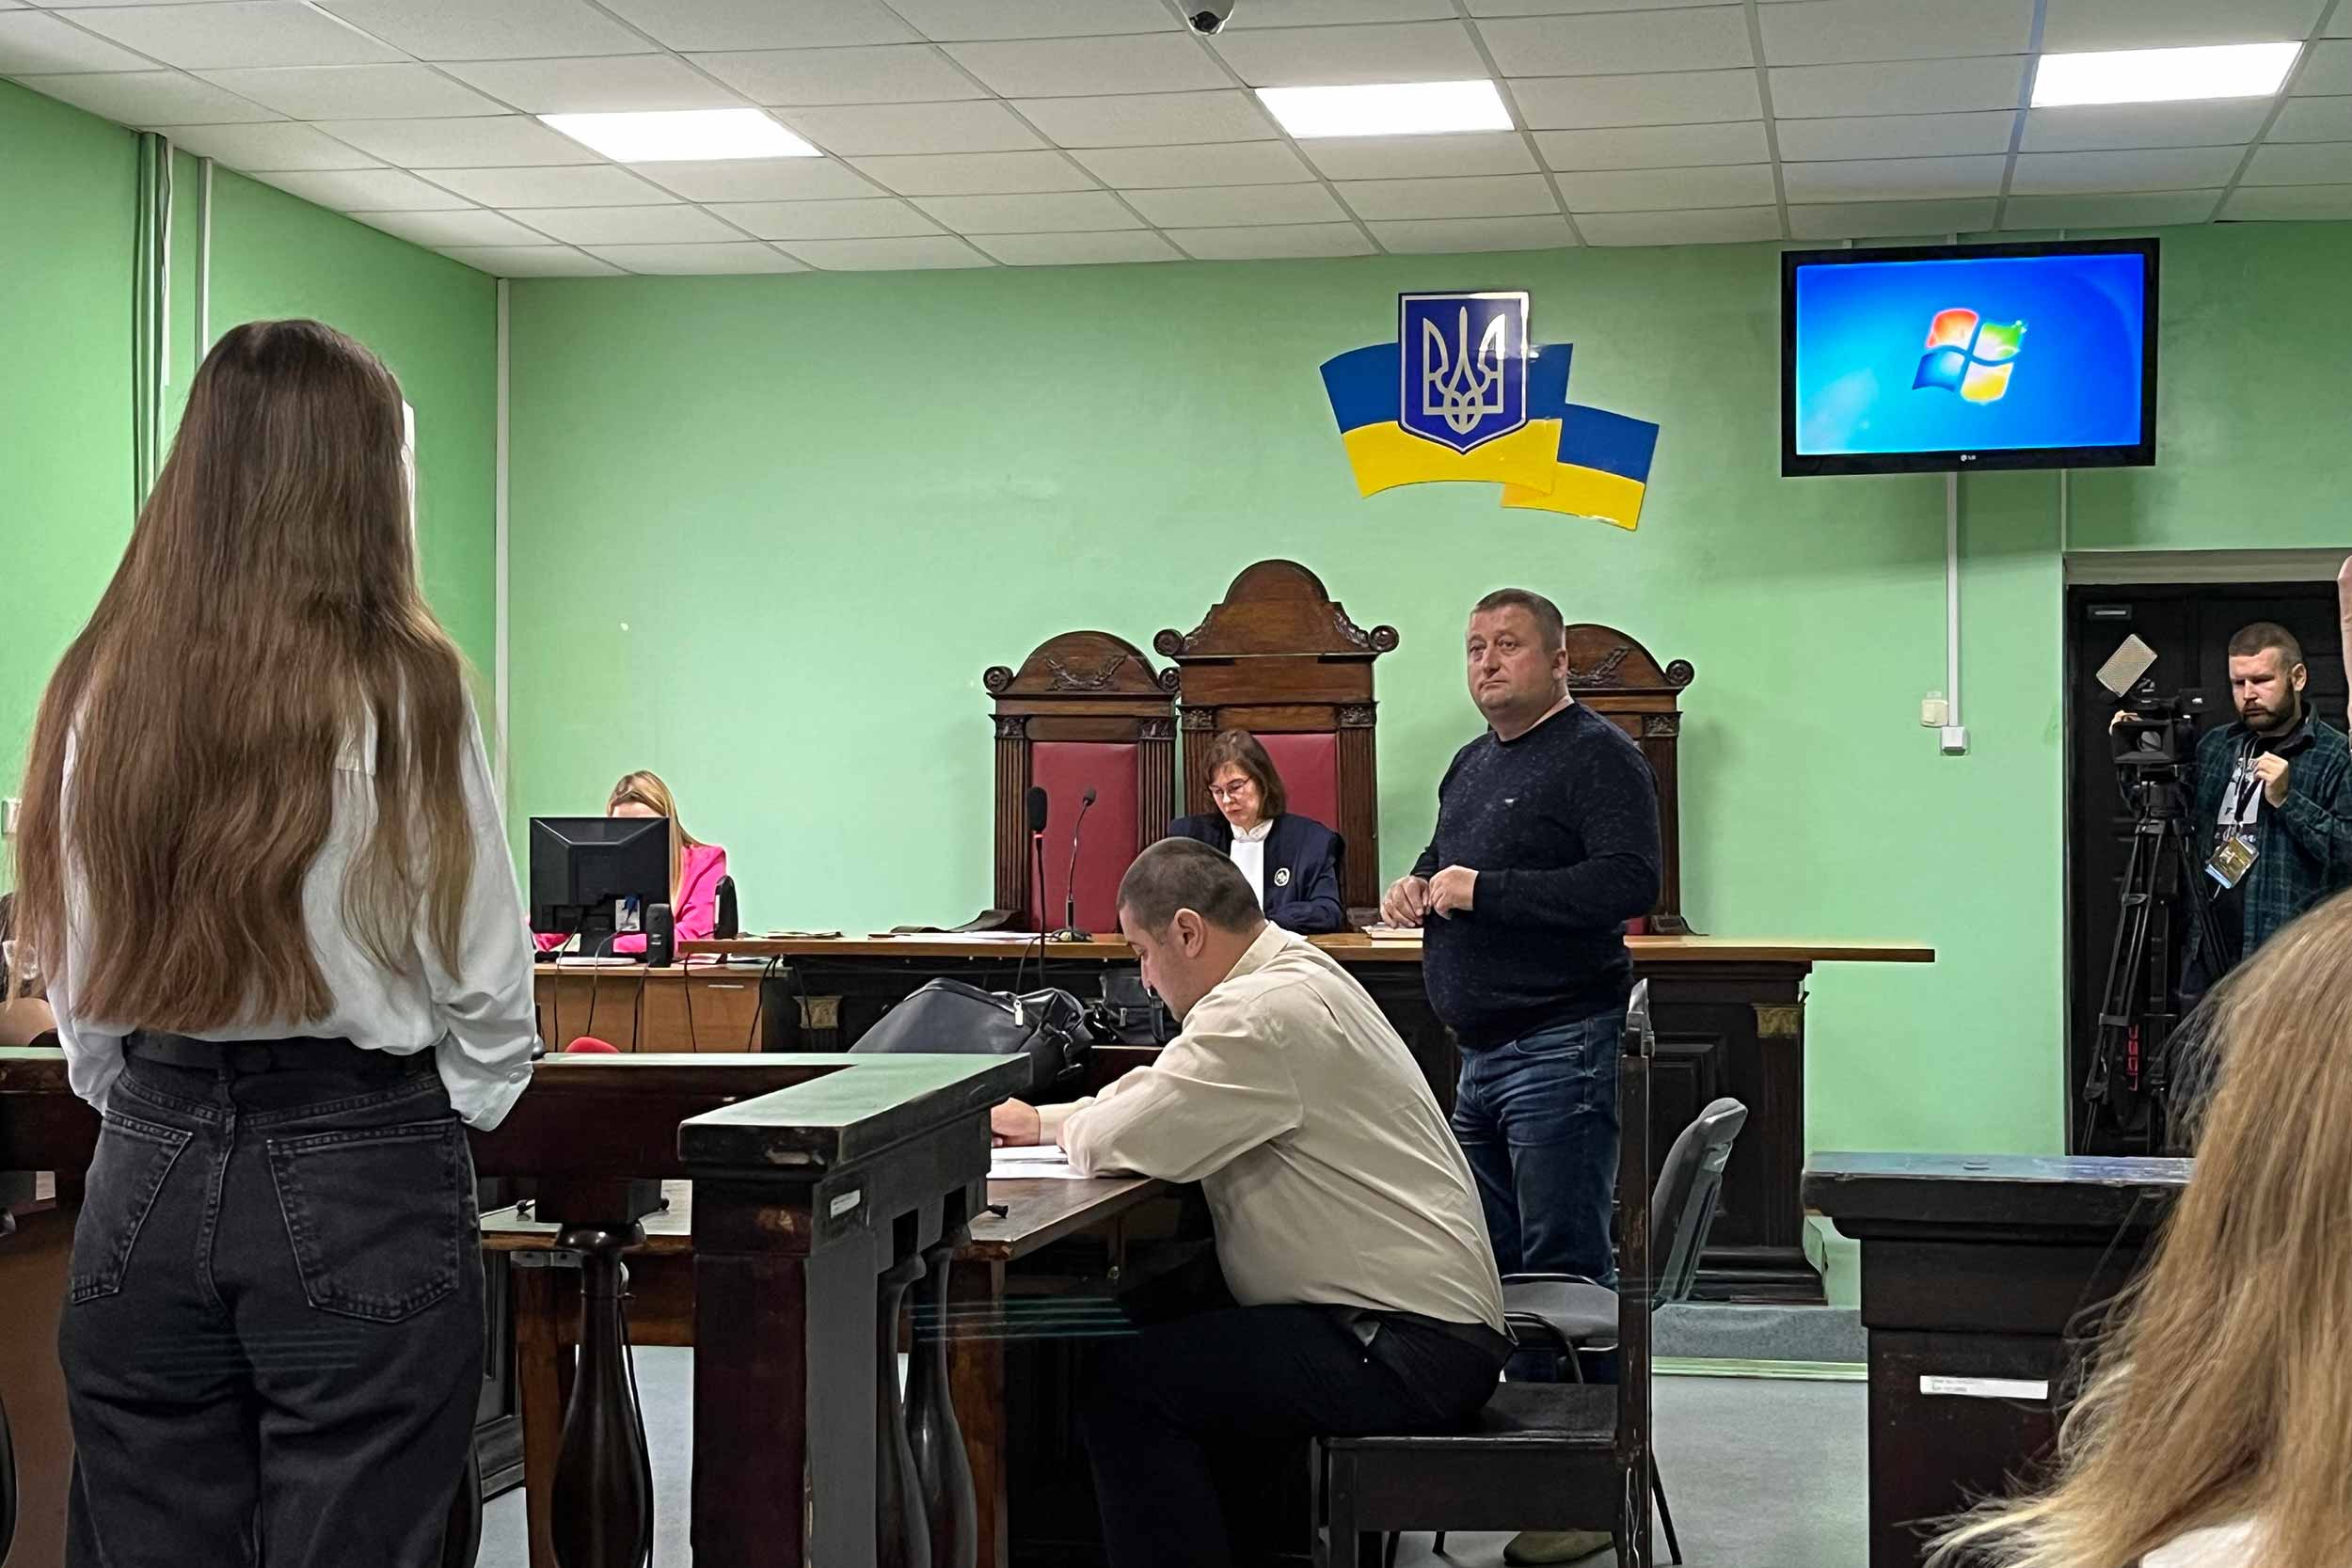 On September 20, judge Svitlana Maiboroda presided over the Chernihiv District Court during the testimonies of 20 residents of Yahidne who were kept in a school basement by Russian forces for about a month. Ten 10 of them died as a result of the living conditions. Fifteen Russian soldiers are tried in absentia for violating the laws and customs of war. © Irina Domashchenko